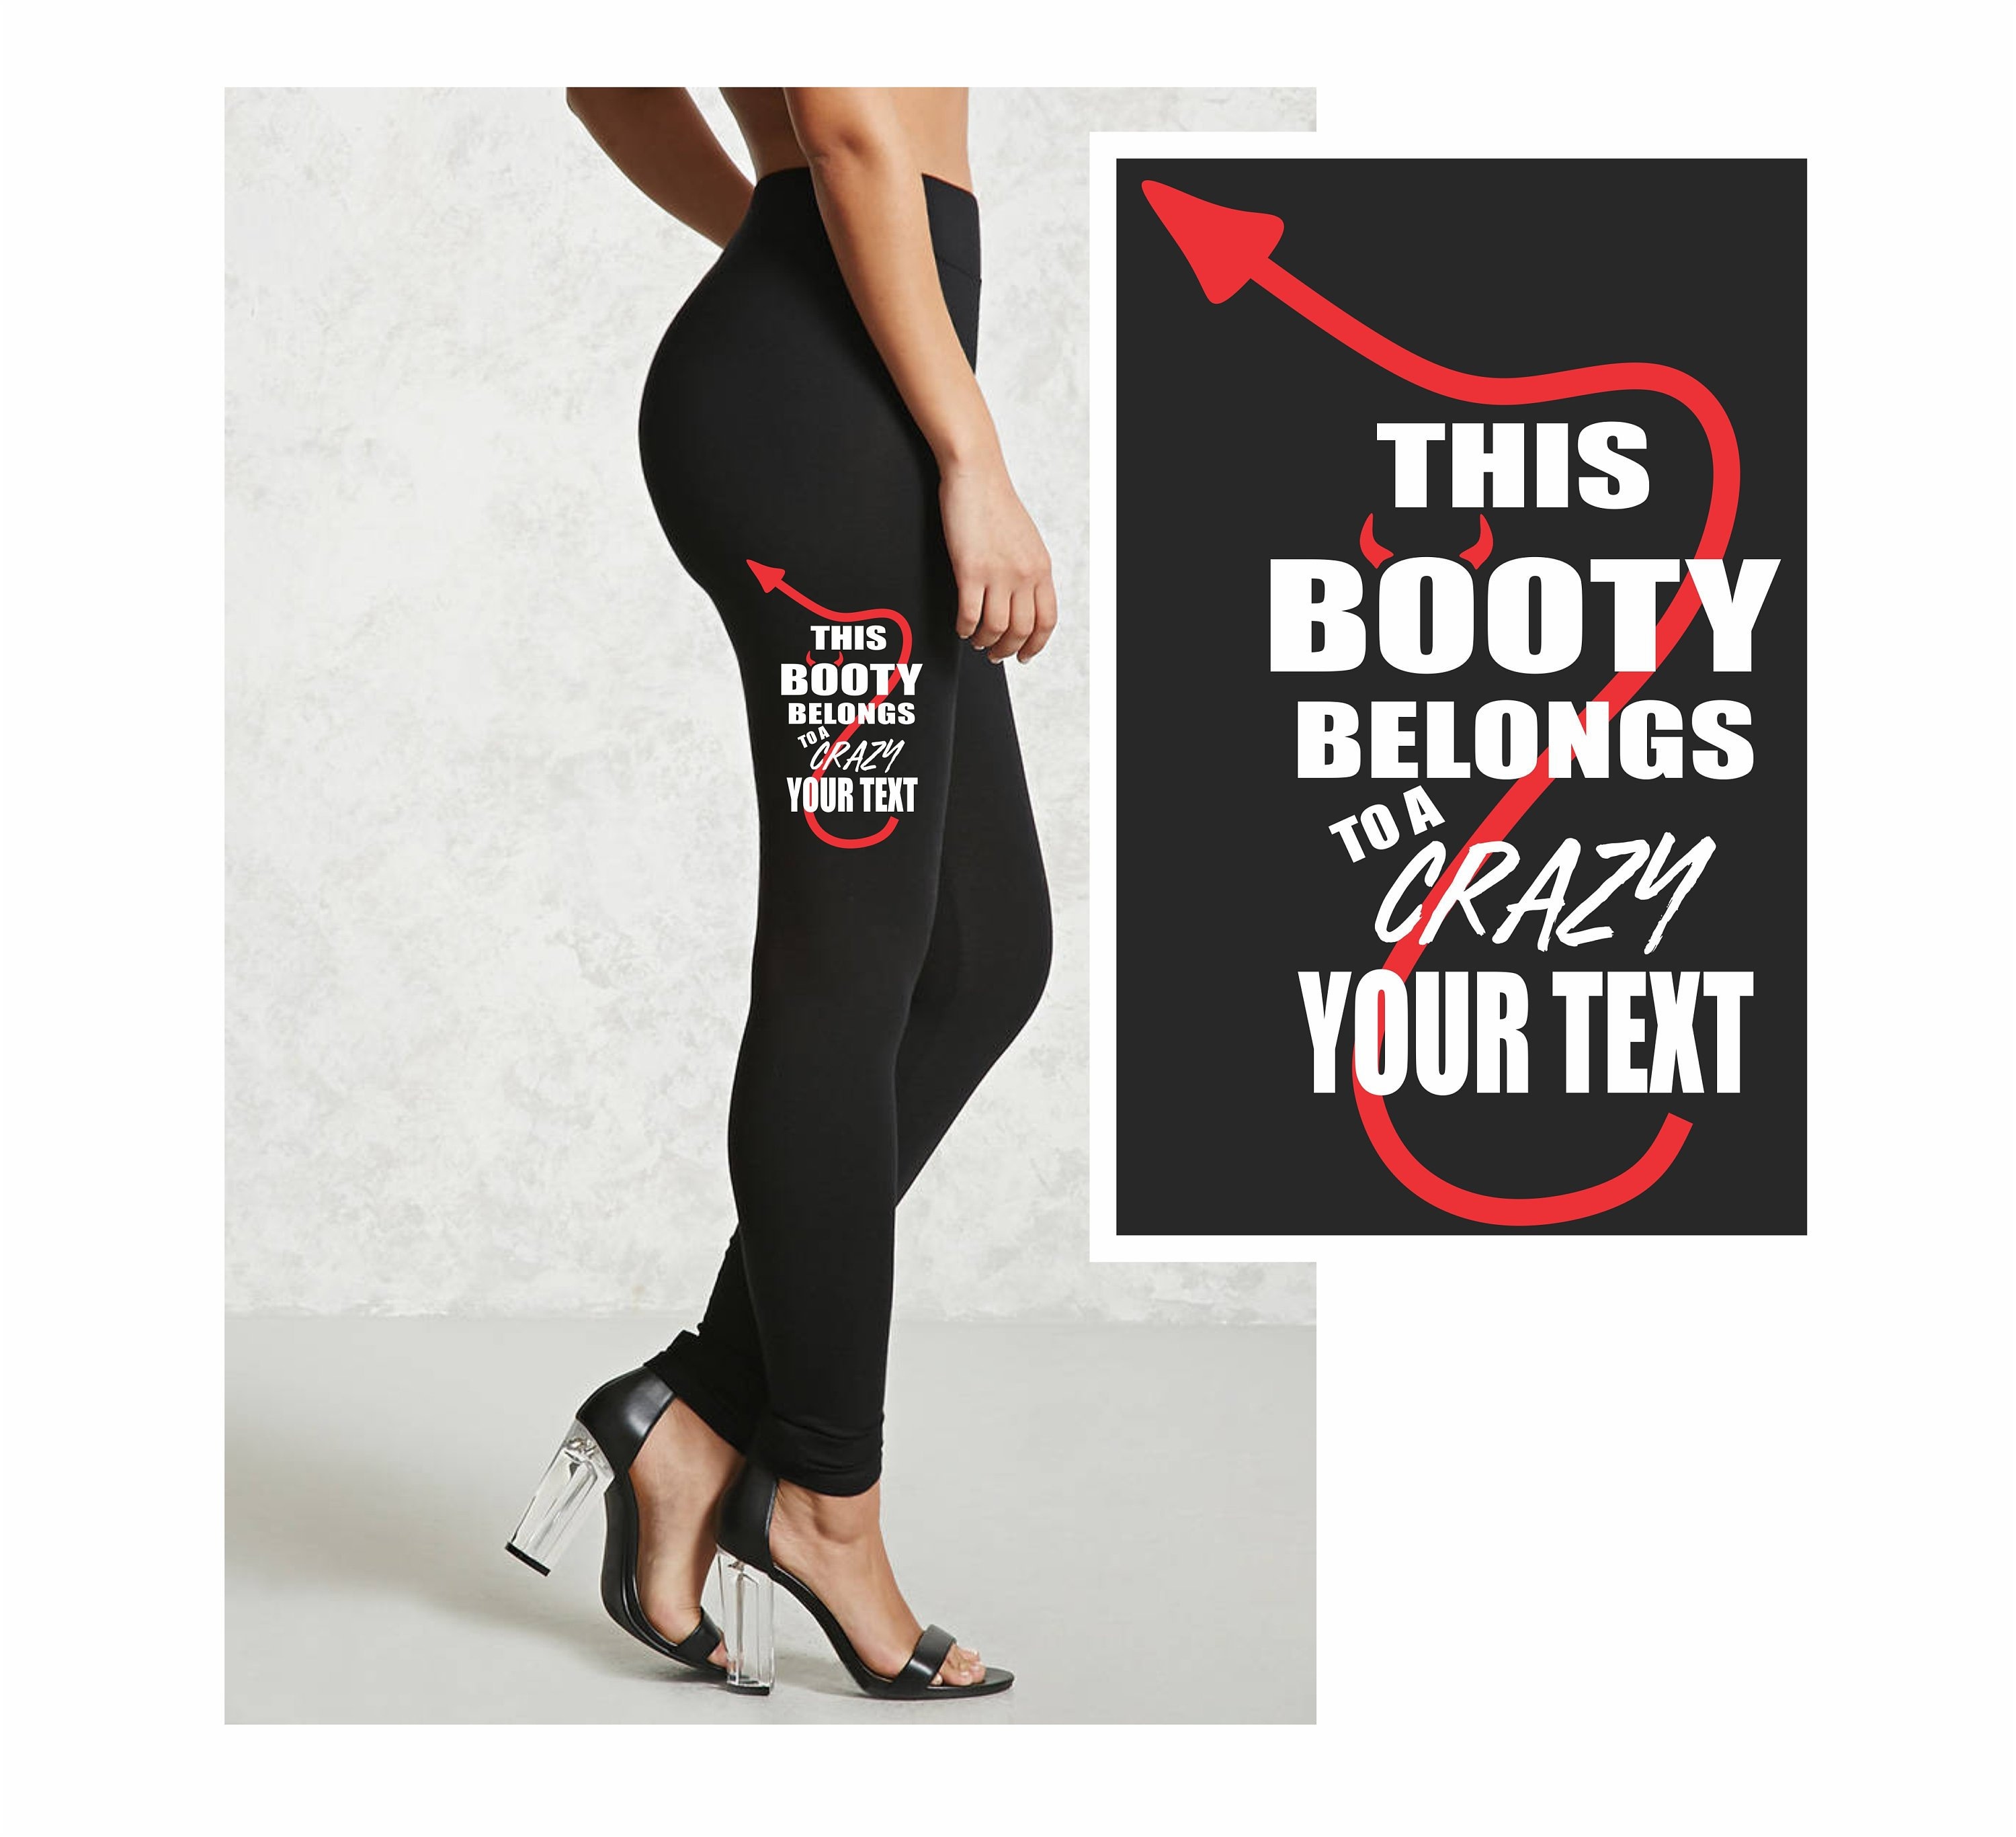 This BOOTY Belongs to A Crazy YOUR TEXT Leggings Black Pant